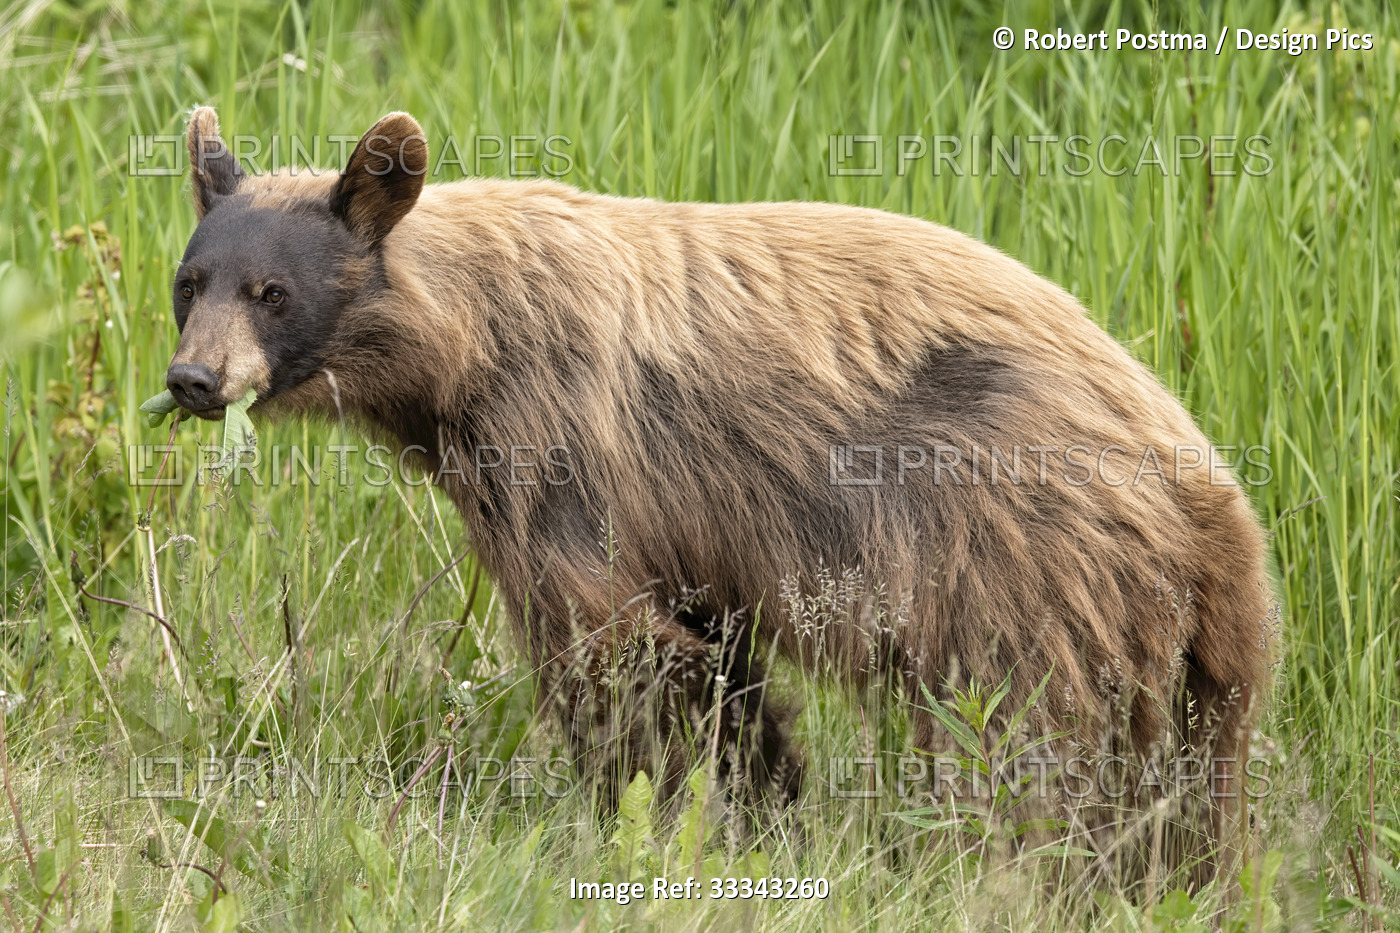 Portrait of a young grizzly bear (Ursus arctos horribilis) standing in a grassy ...